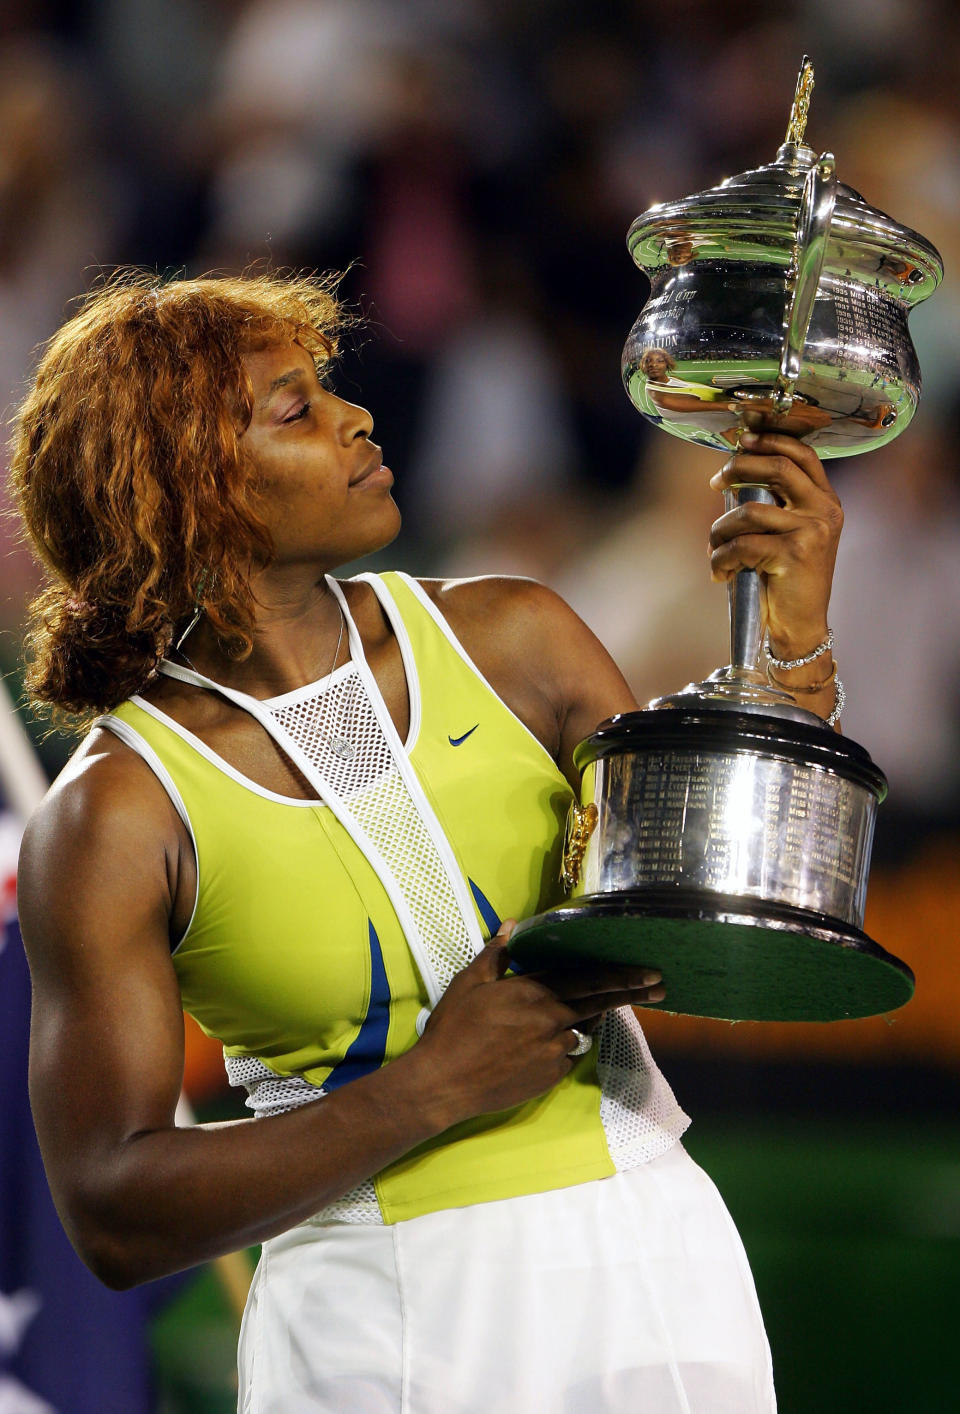 Serena Williams of the USA stares at the trophy after defeating Lindsay Davenport of the USA during the Women's Final during day thirteen of the Australian Open Grand Slam at Melbourne Park January 29, 2005 in Melbourne, Australia. (Photo by Chris McGrath/Getty Images)